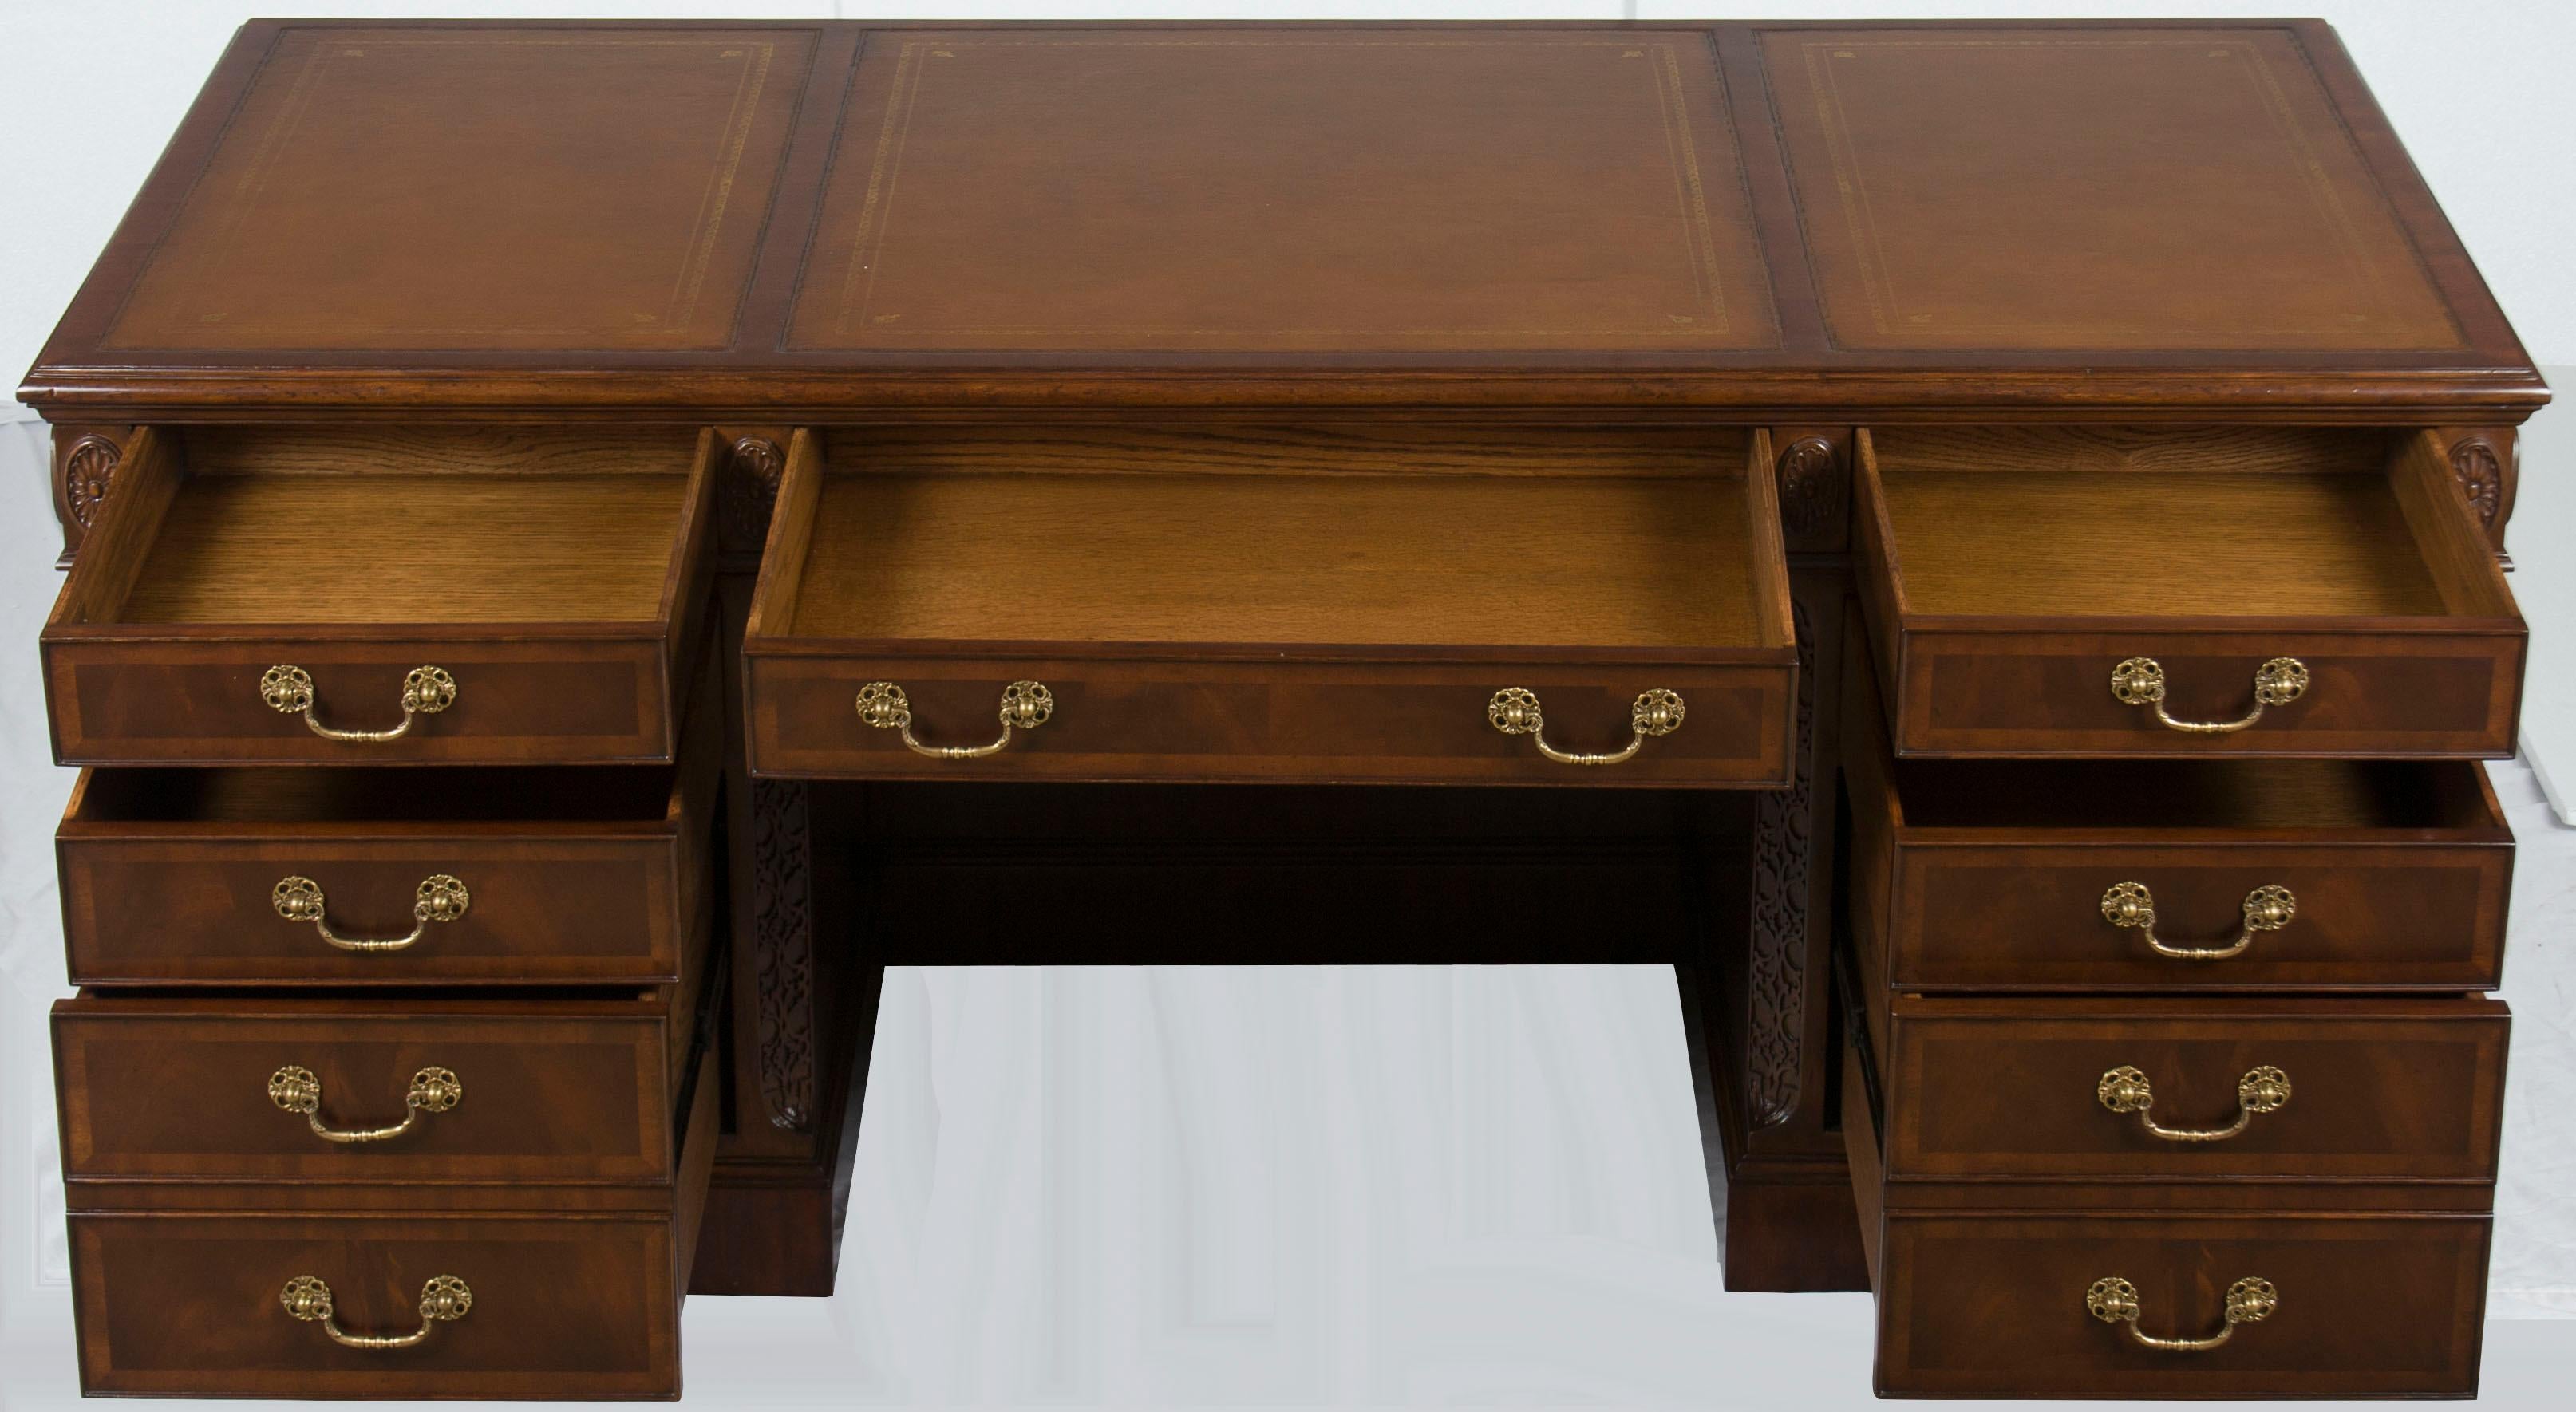 This stunning large home office desk provides a great work space and luxurious drawer storage! It features subtle carved decorations, stunning flame mahogany, and supple leather to create a classical and distinguished look. With both style and